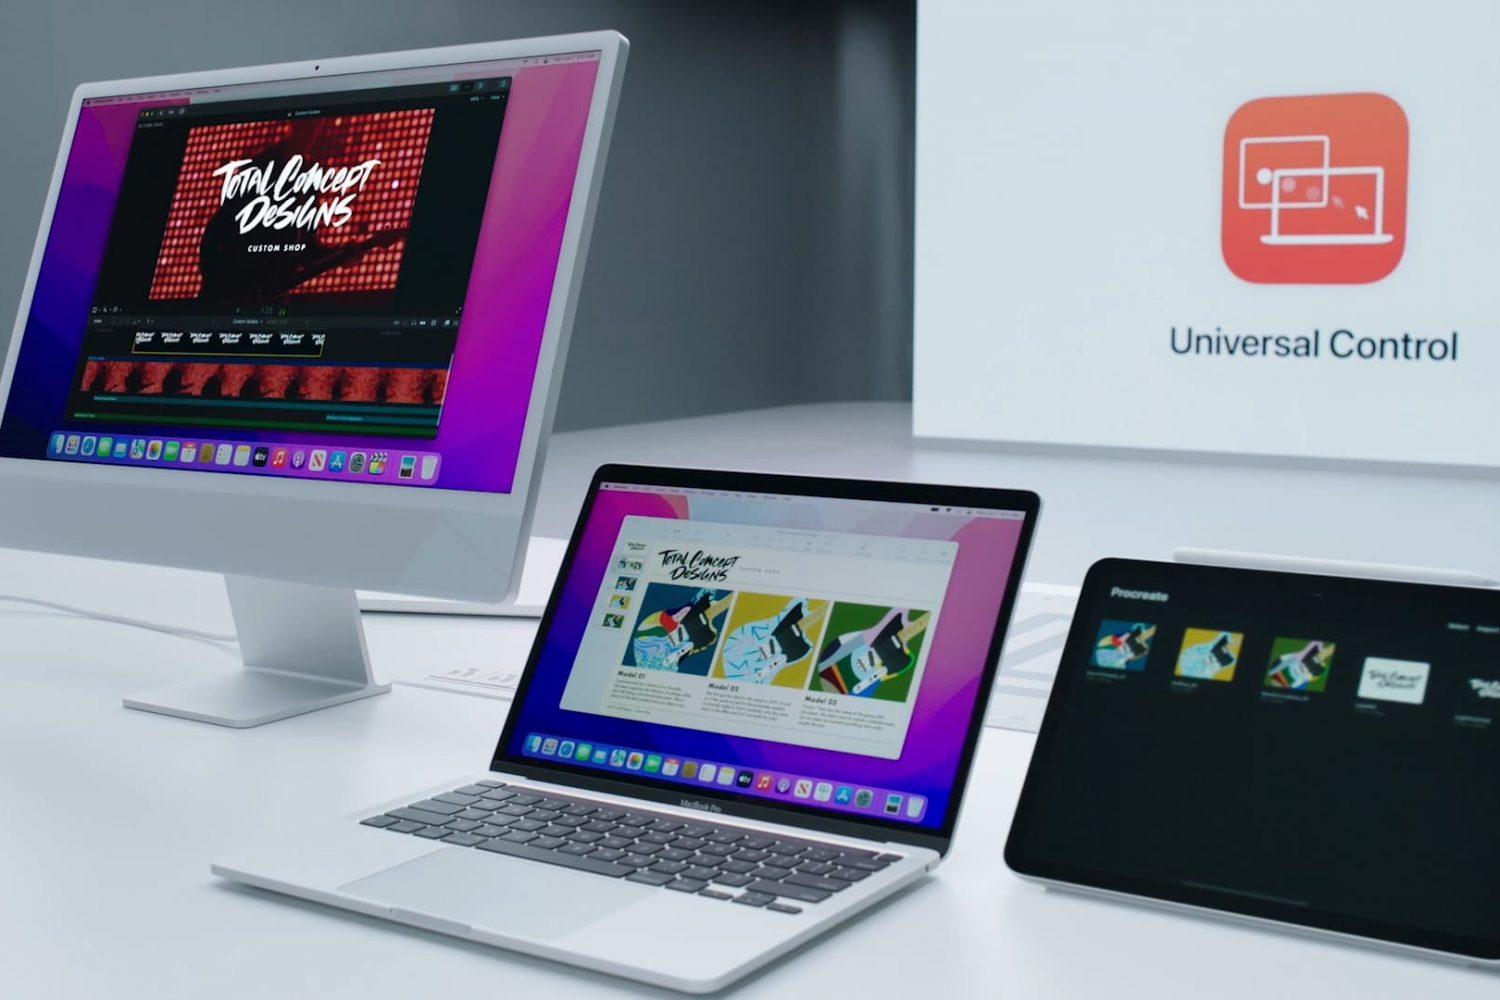 Apple's marketing image showing an iMac, MacBook Pro and iPad next to each other on a work desk, controlled wirelessly with the Universal Control feature